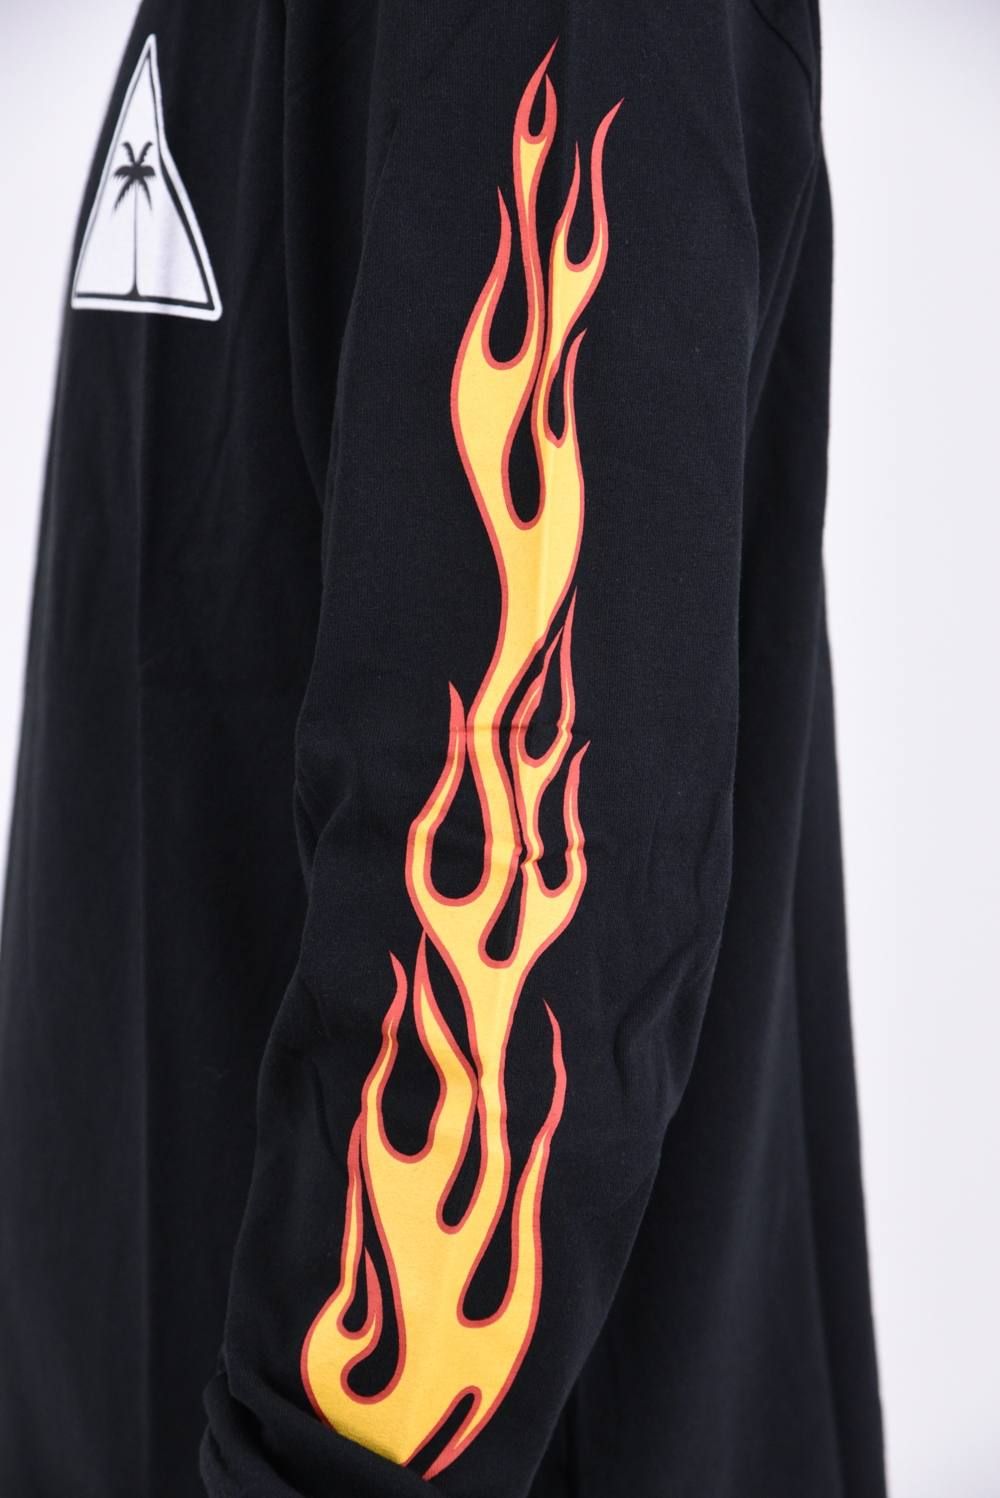 PALM ANGELS - PALMS MS AND FLAMES TEE LS / モックネック 長袖